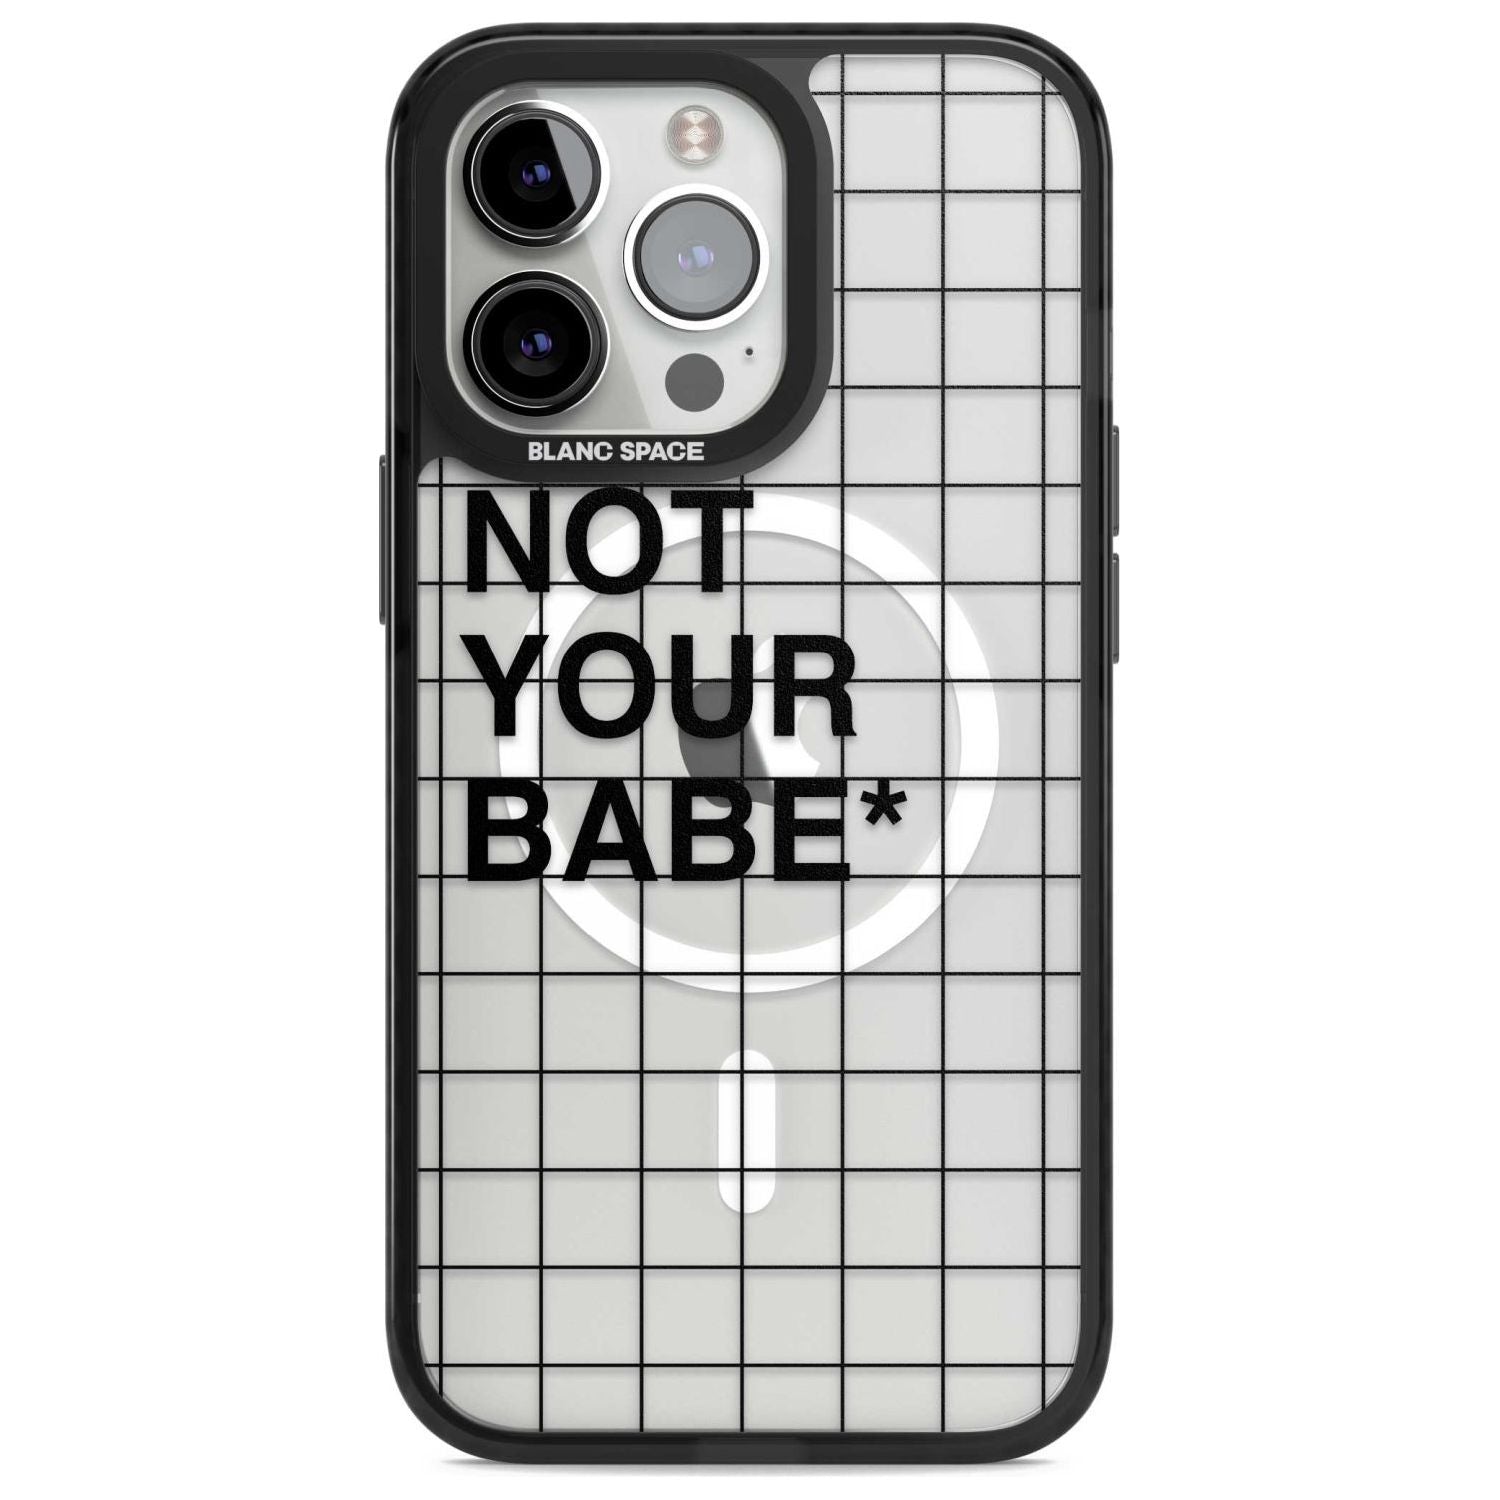 Grid Pattern Not Your Babe Phone Case iPhone 15 Pro Max / Magsafe Black Impact Case,iPhone 15 Pro / Magsafe Black Impact Case,iPhone 14 Pro Max / Magsafe Black Impact Case,iPhone 14 Pro / Magsafe Black Impact Case,iPhone 13 Pro / Magsafe Black Impact Case Blanc Space